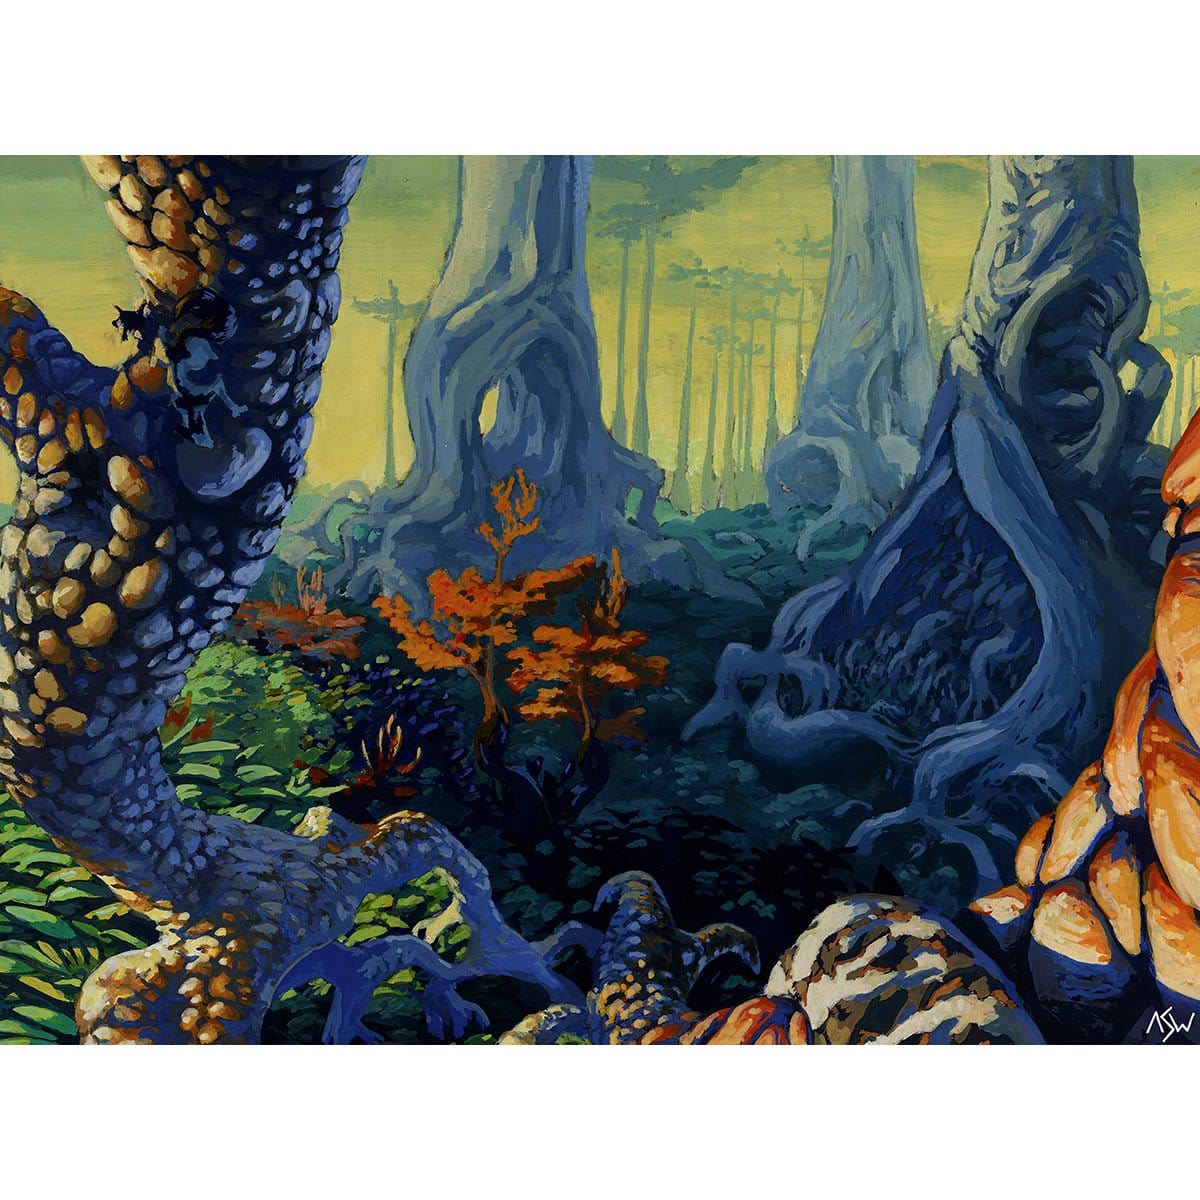 Forest (Urza&#39;s Saga - C) Print - Print - Original Magic Art - Accessories for Magic the Gathering and other card games